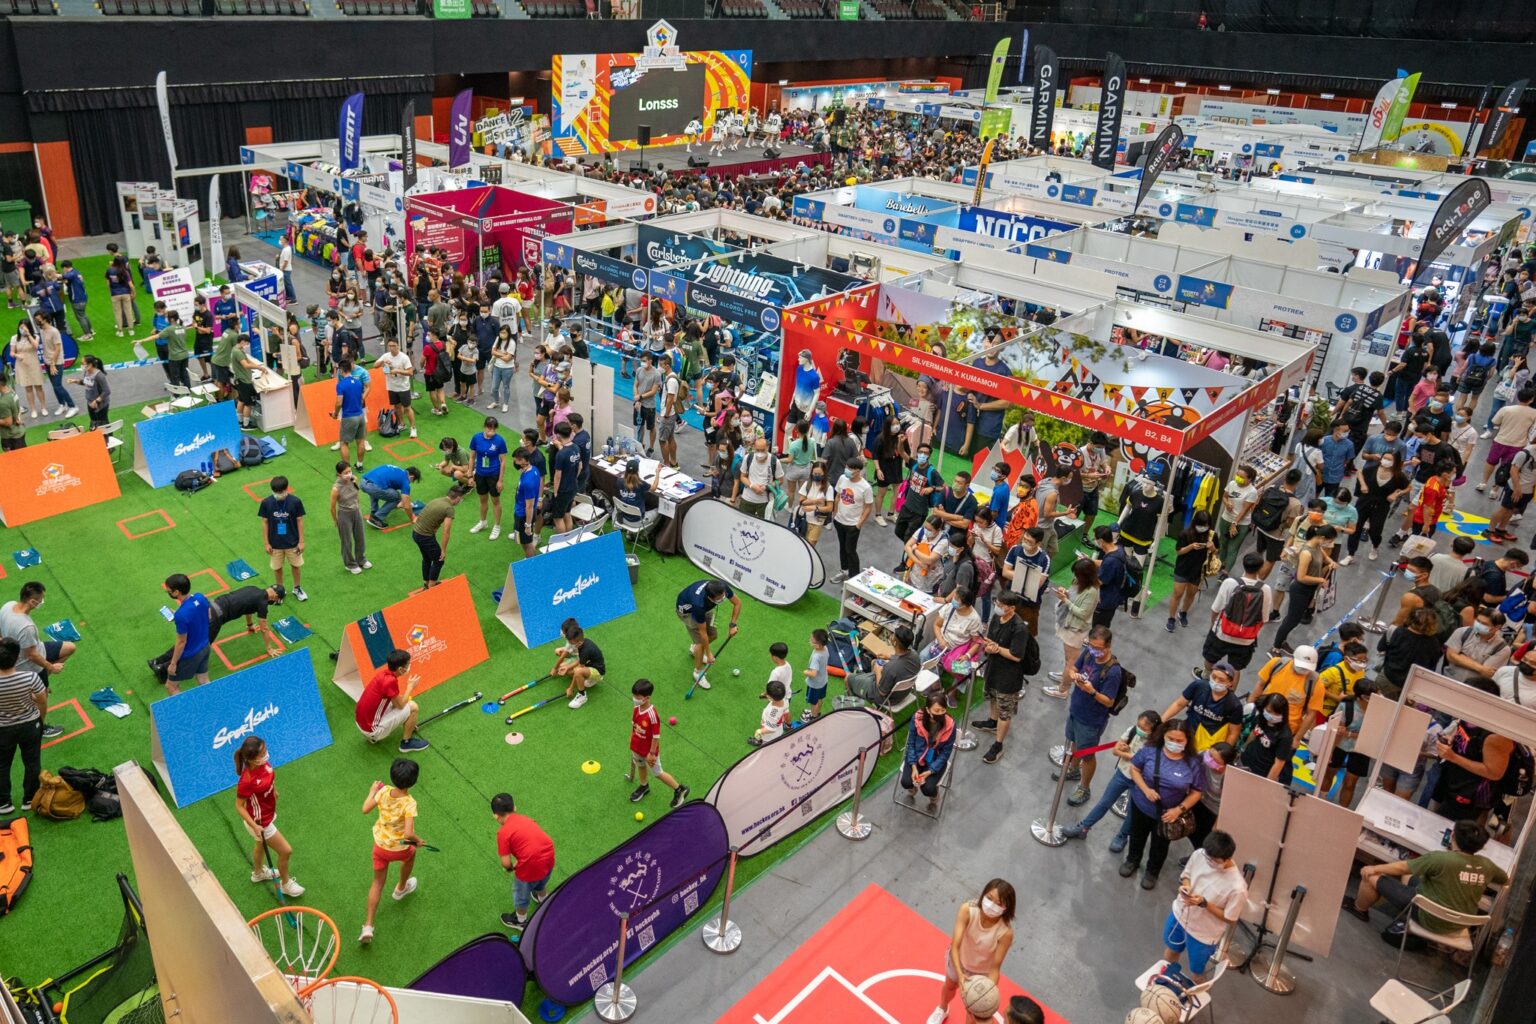 An overhead view of the Sports Expo, where visitors are playing and visiting stalls.